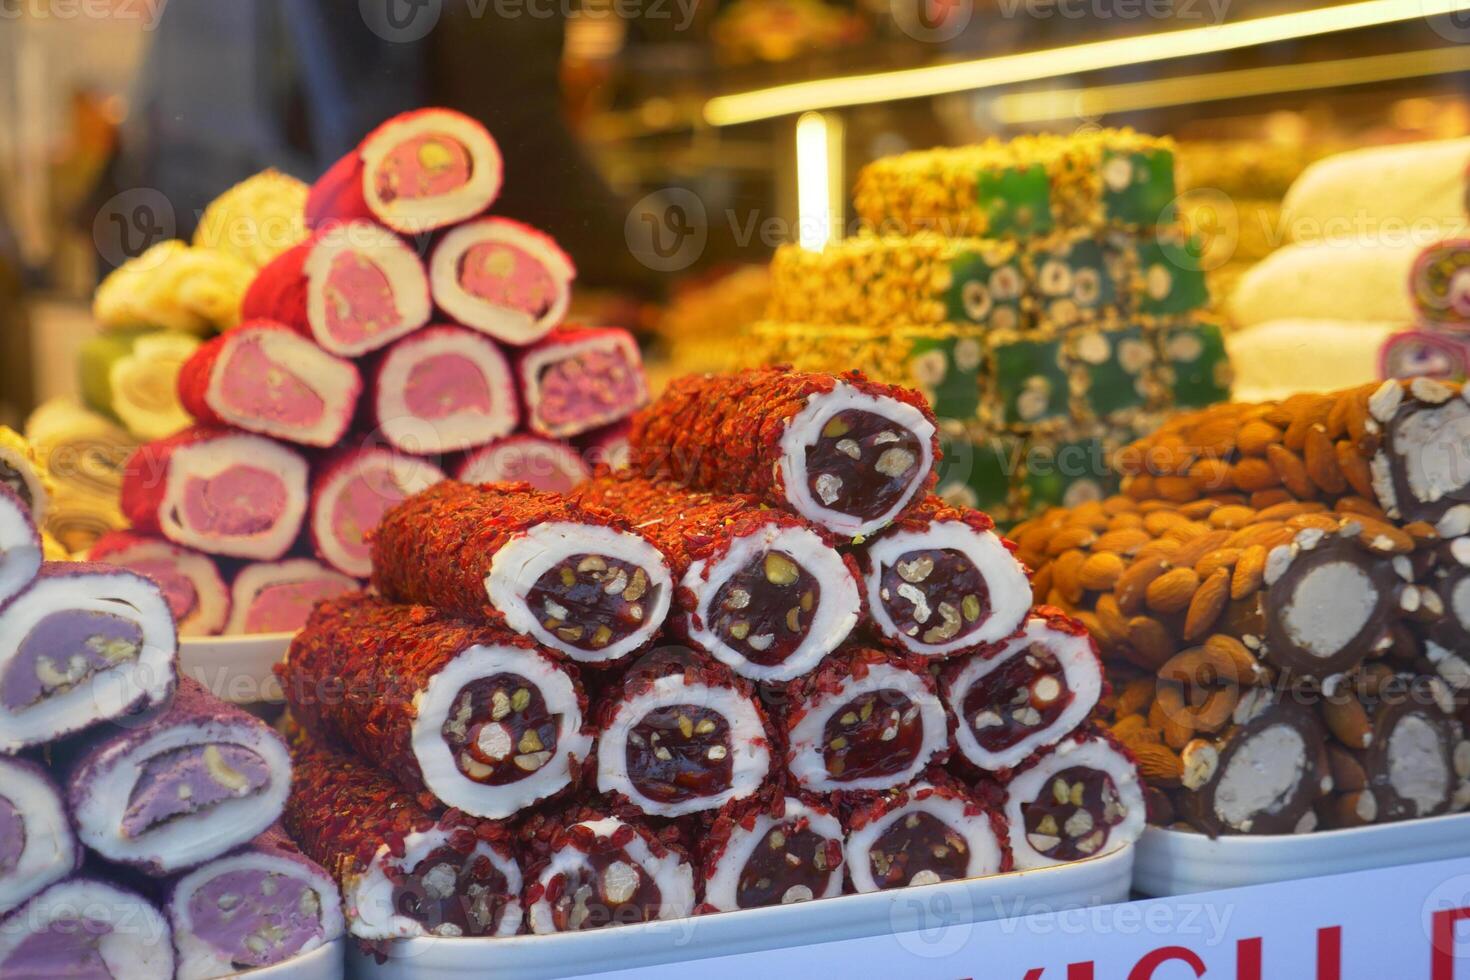 Turkish traditional sweet Turkish delight sold in the market photo